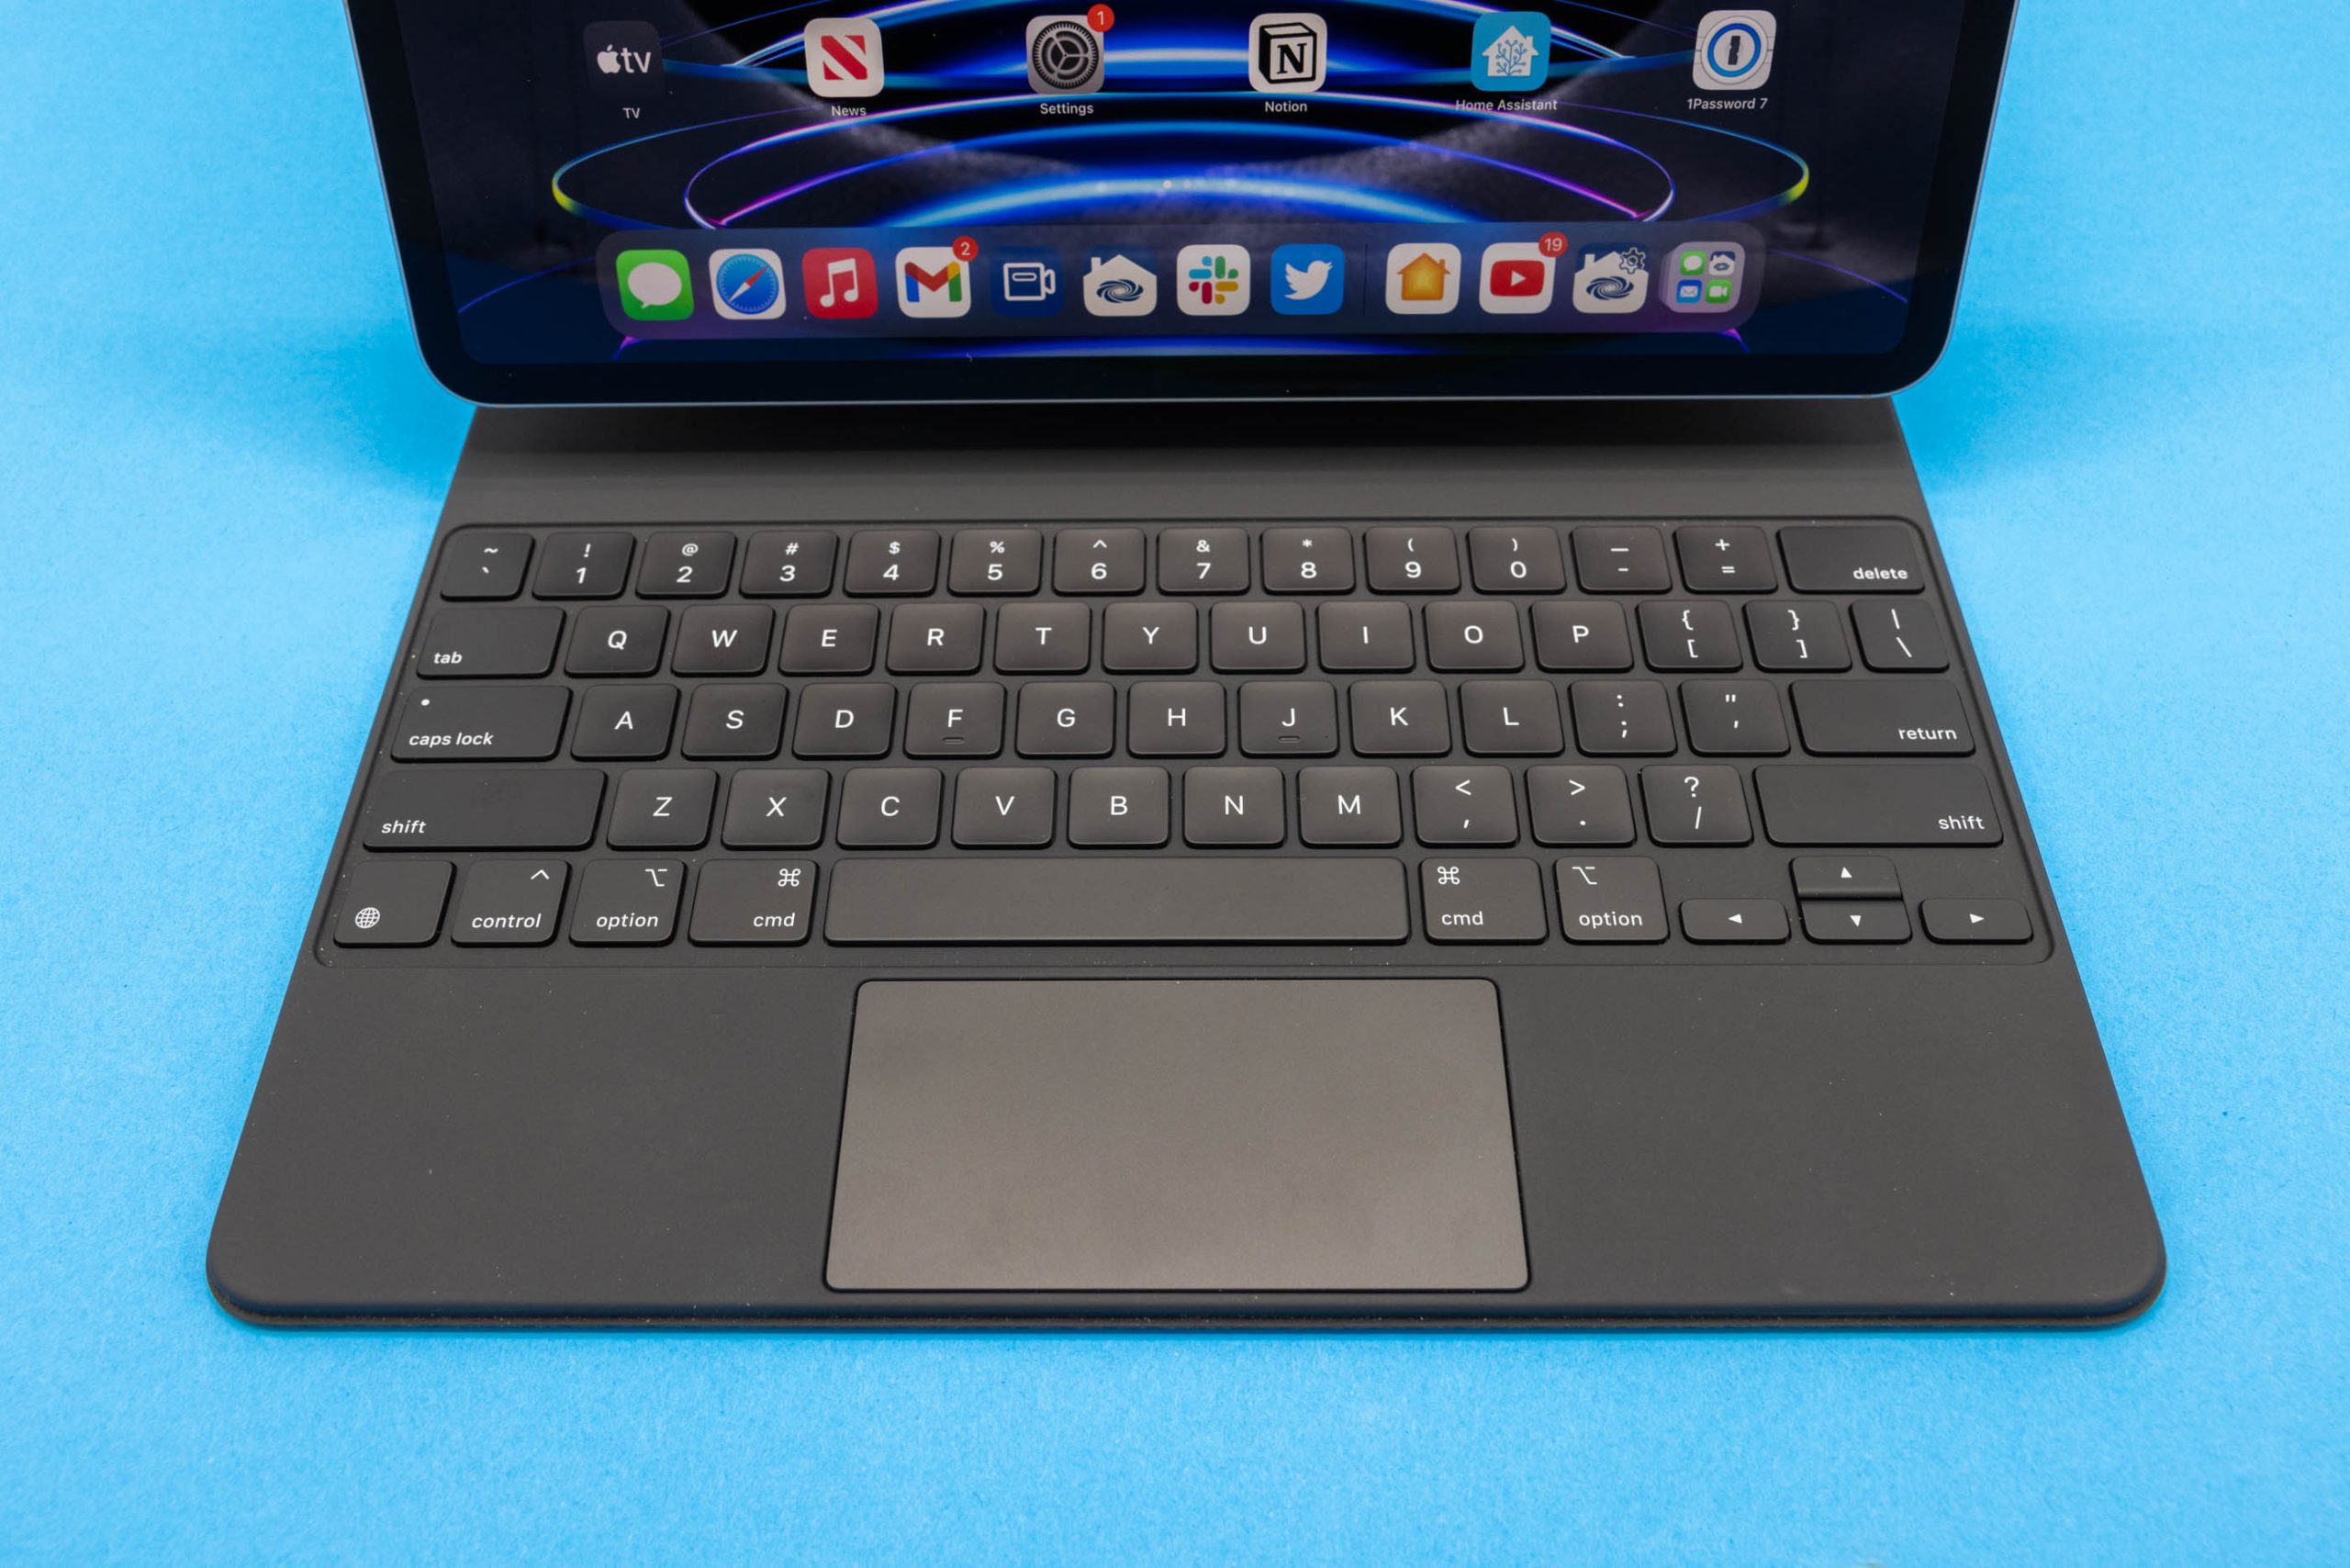 The iPad is an accessory for the Mac, not a replacement